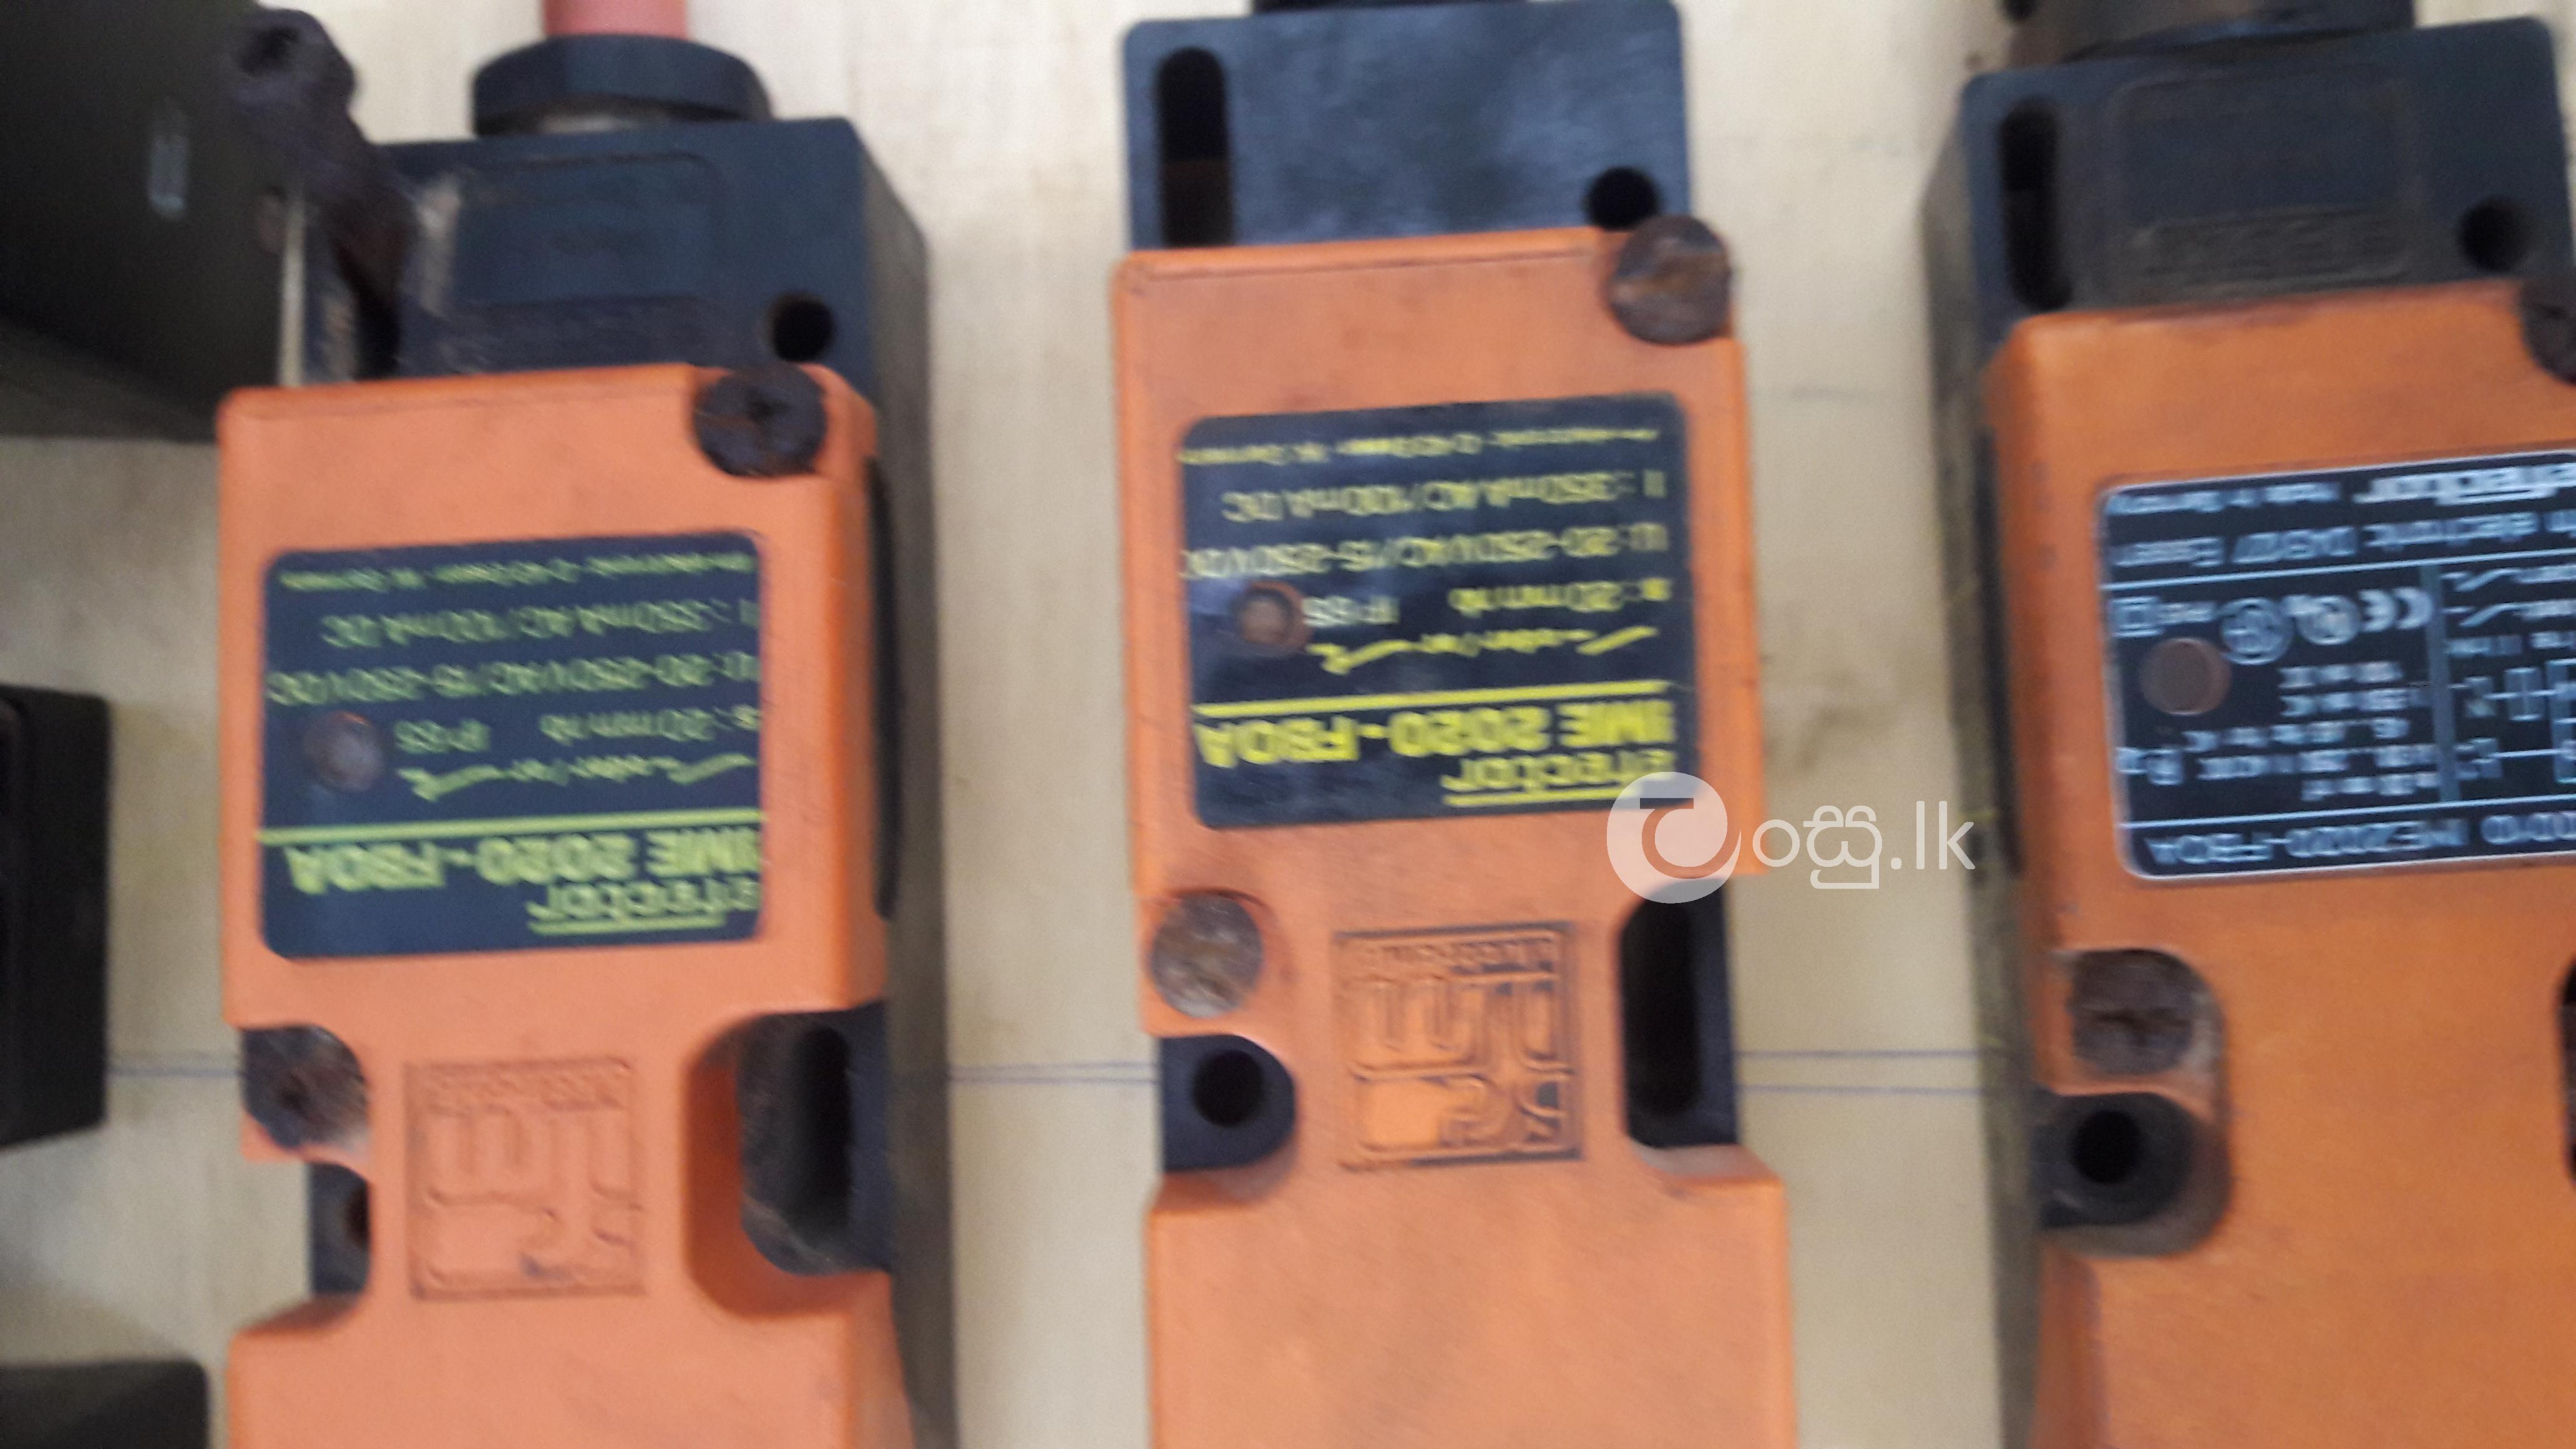 used motors & Inverters  from Australia (SEW) 1Hp to 75Hp Industry Tools & Machinery in Moratuwa